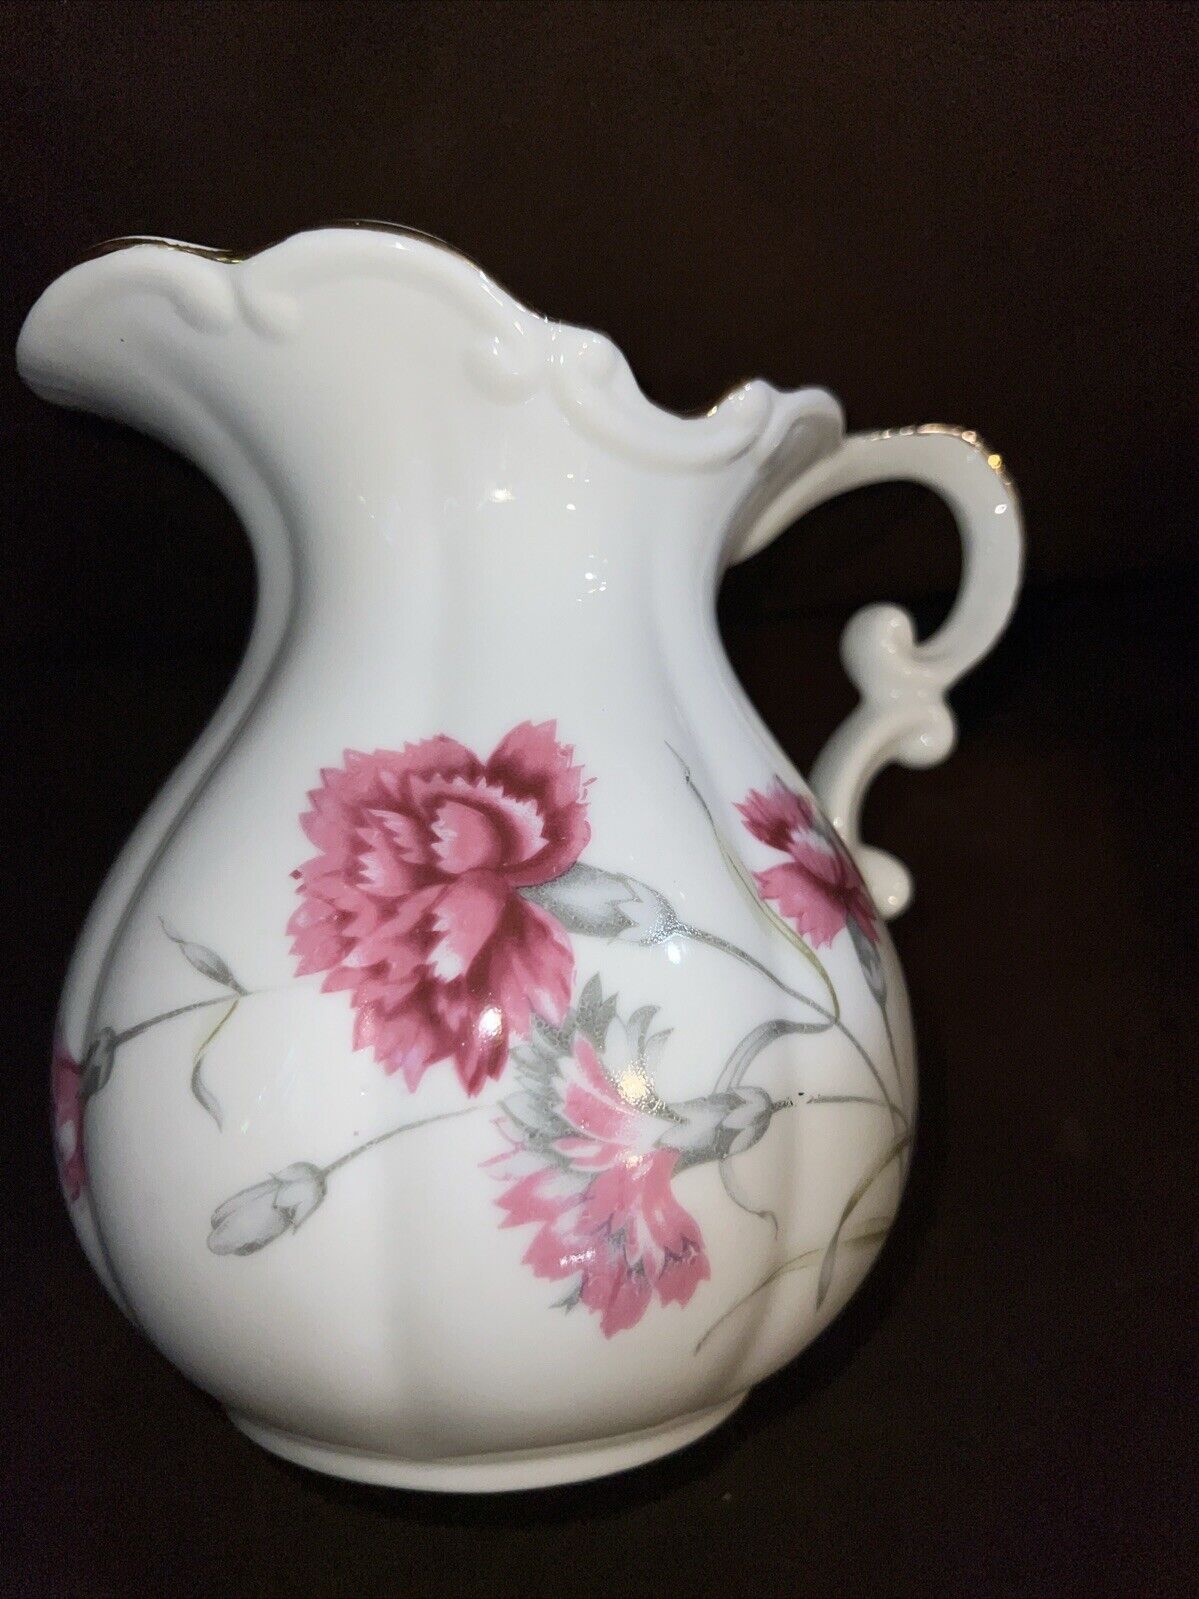 Vintage NASCO China pitcher with pin flowers gold trim R8076 JAPAN